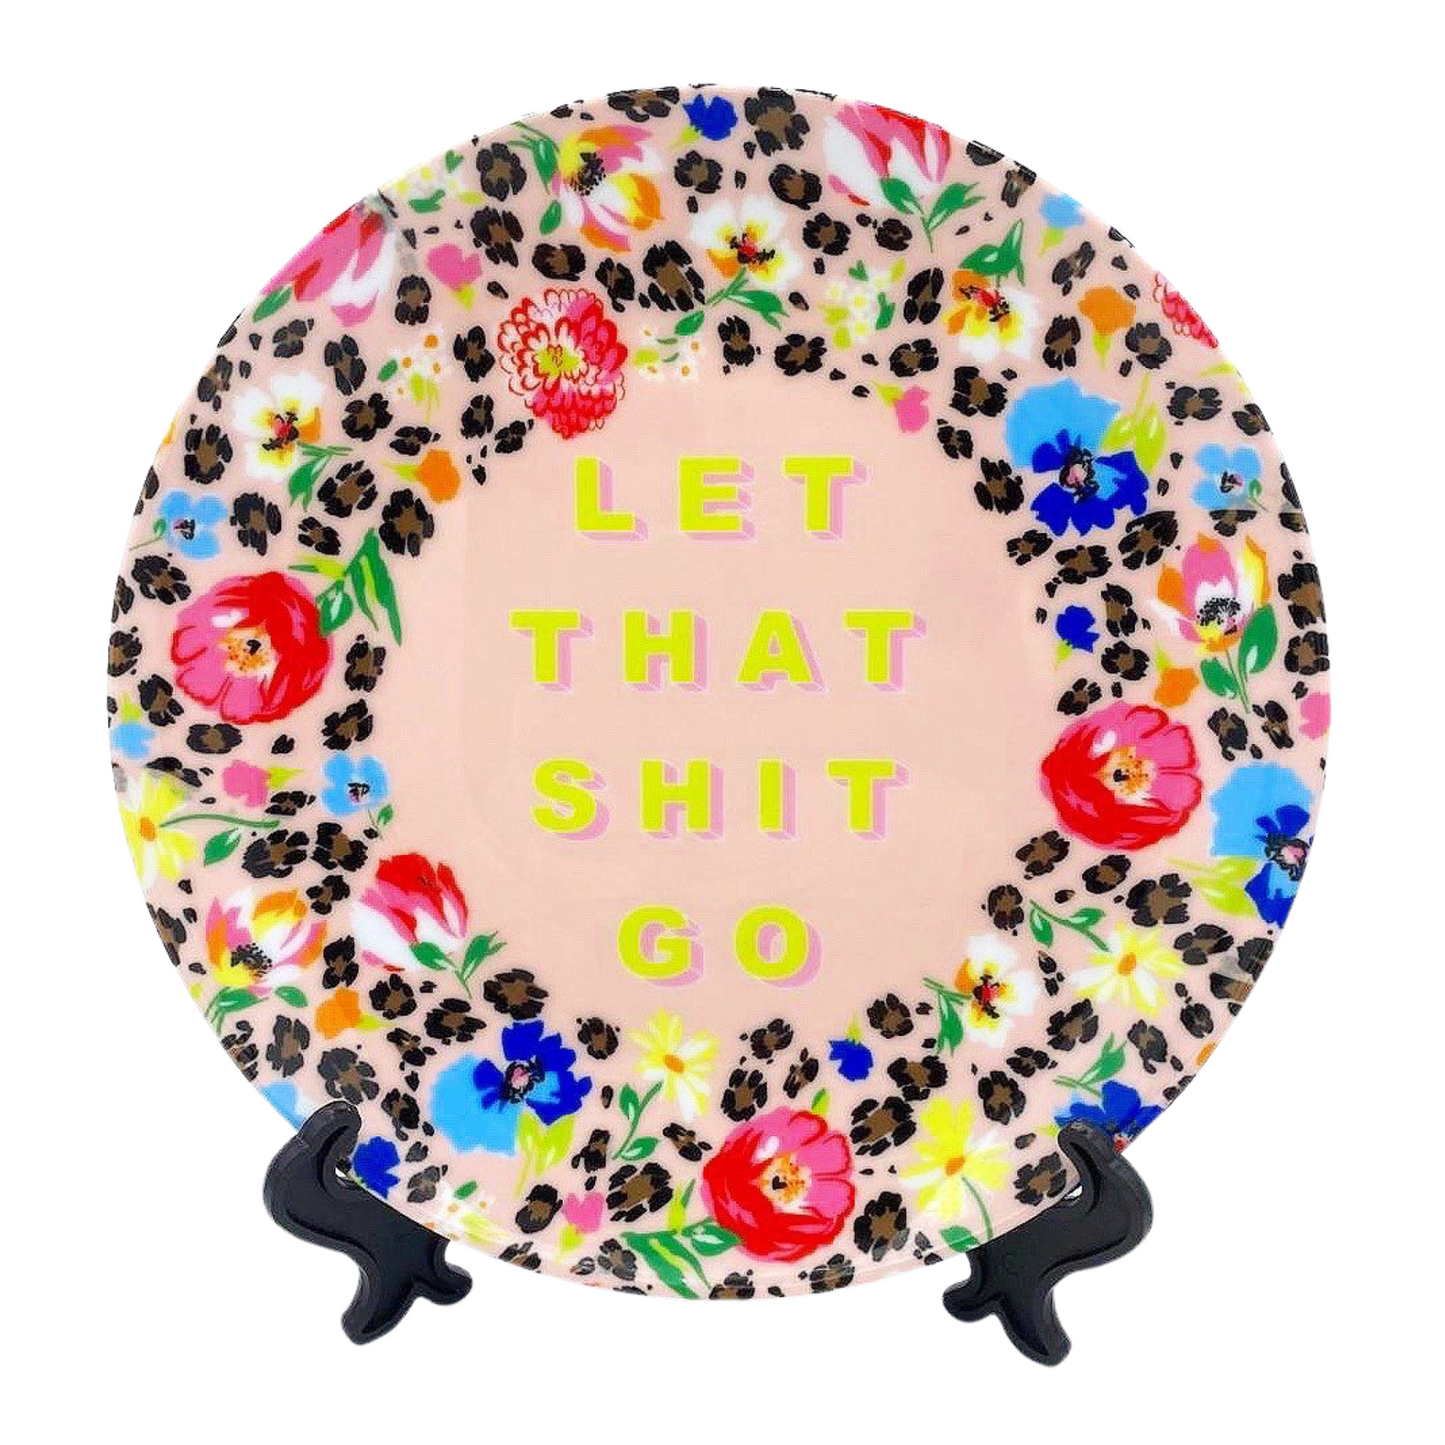 Let That Shit Go by Pearl & Clover